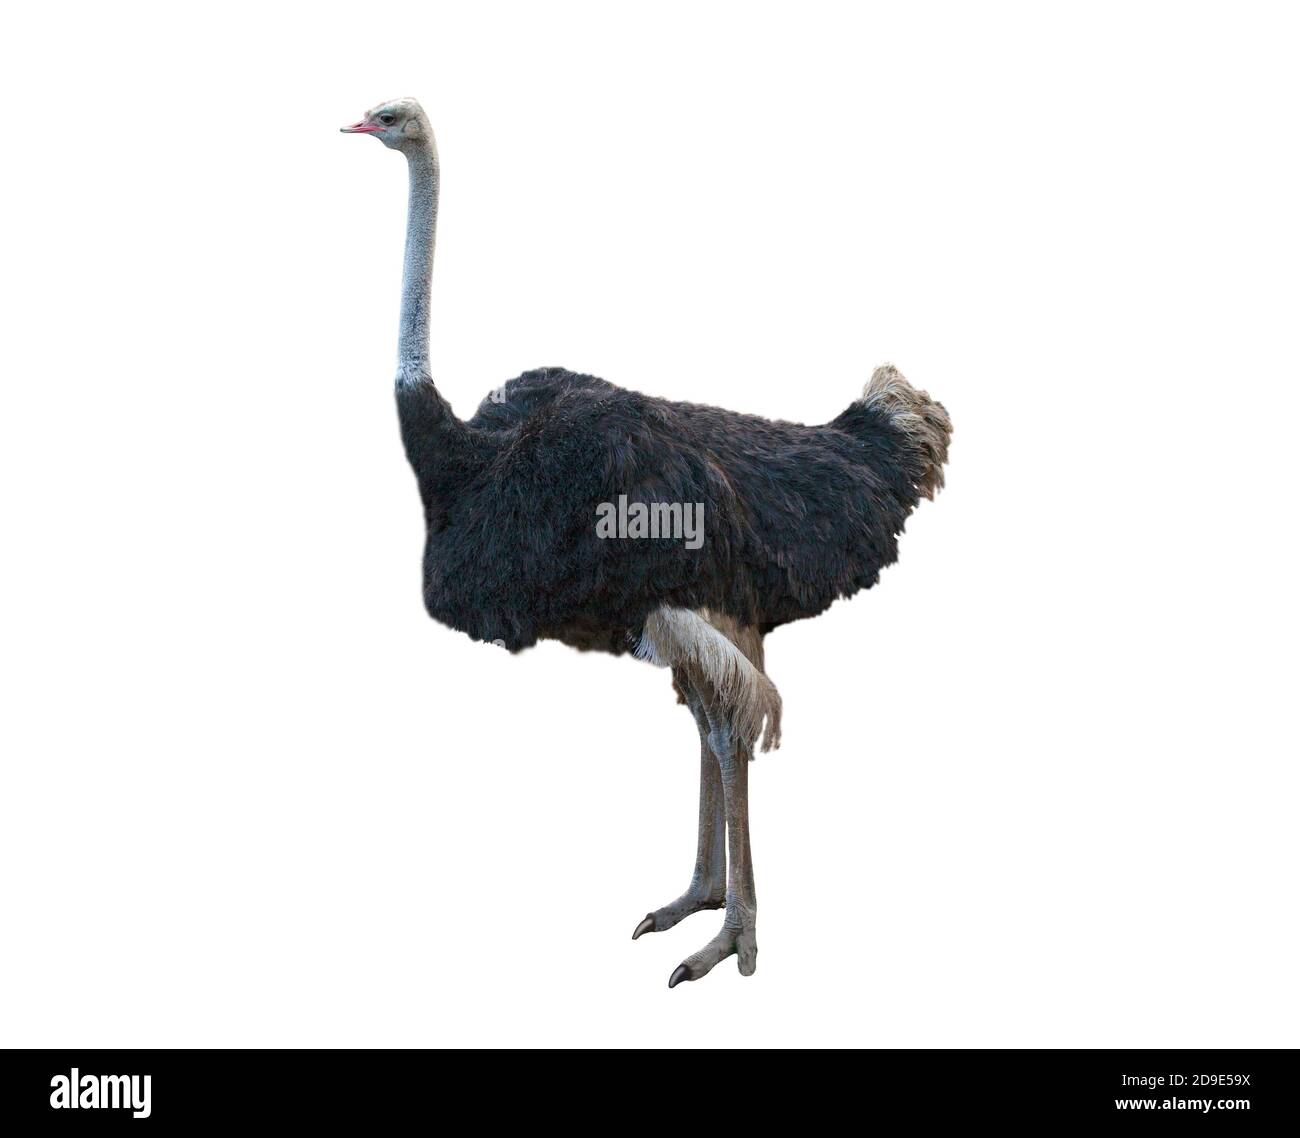 The common ostrich is a species of large flightless bird native to certain large areas of Africa in the order Struthioniformes. Image isolated on whit Stock Photo